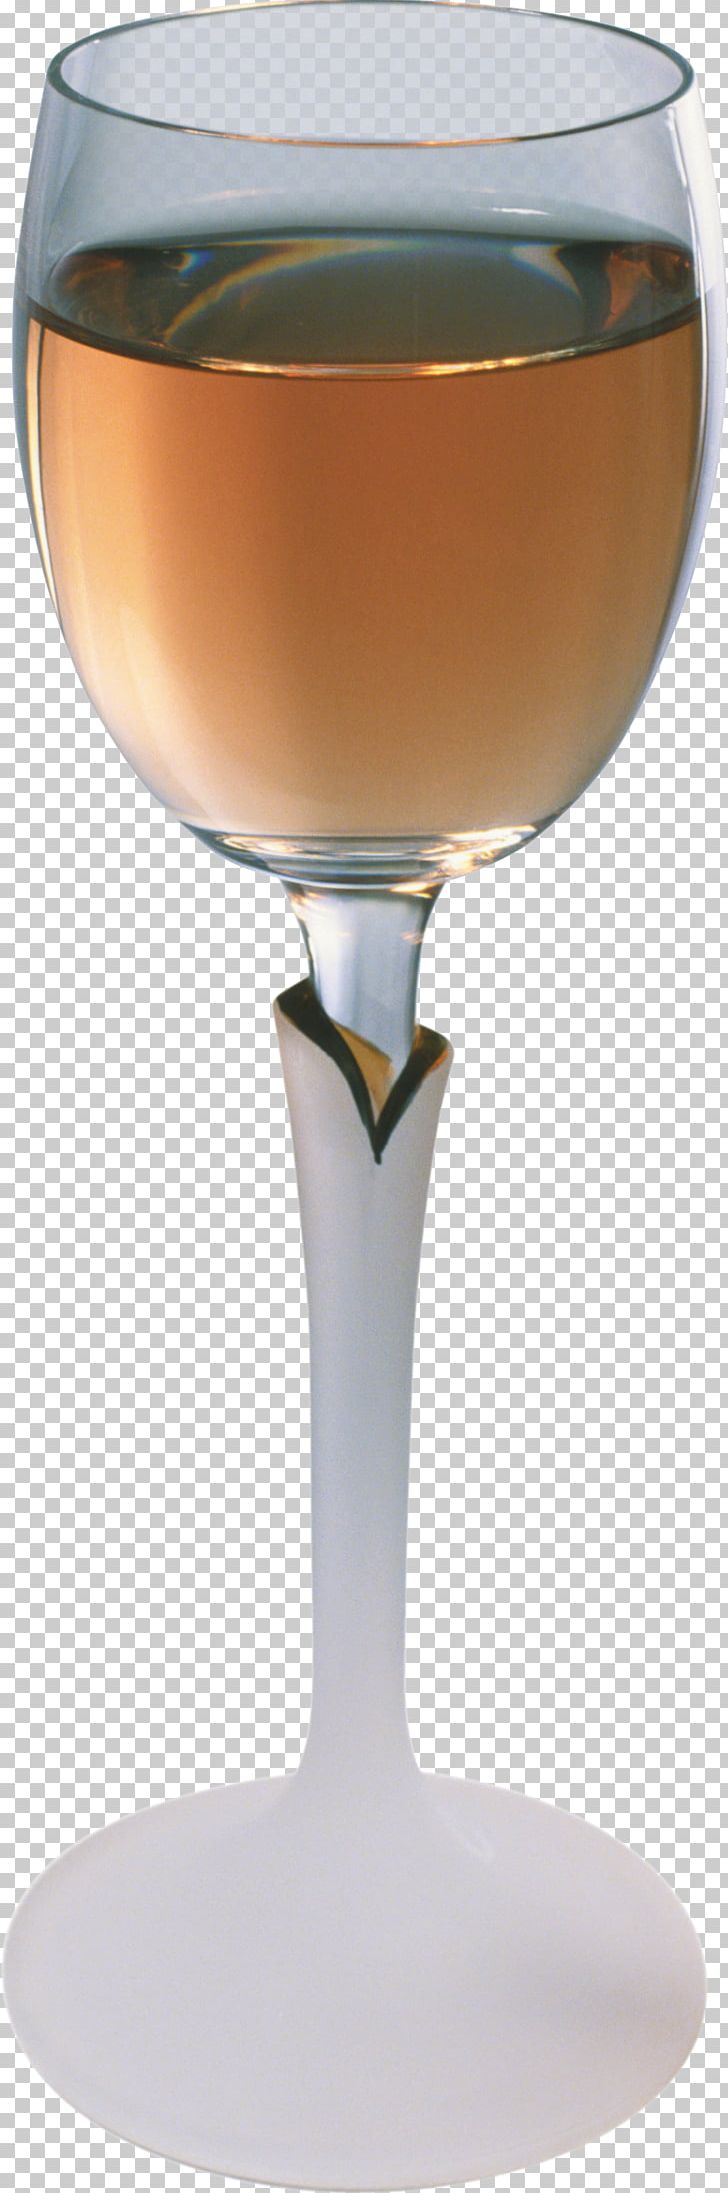 Wine Glass Liqueur Champagne Cocktail PNG, Clipart, Alcoholic Drink, Barware, Champagne, Champagne Glass, Champagne Stemware Free PNG Download